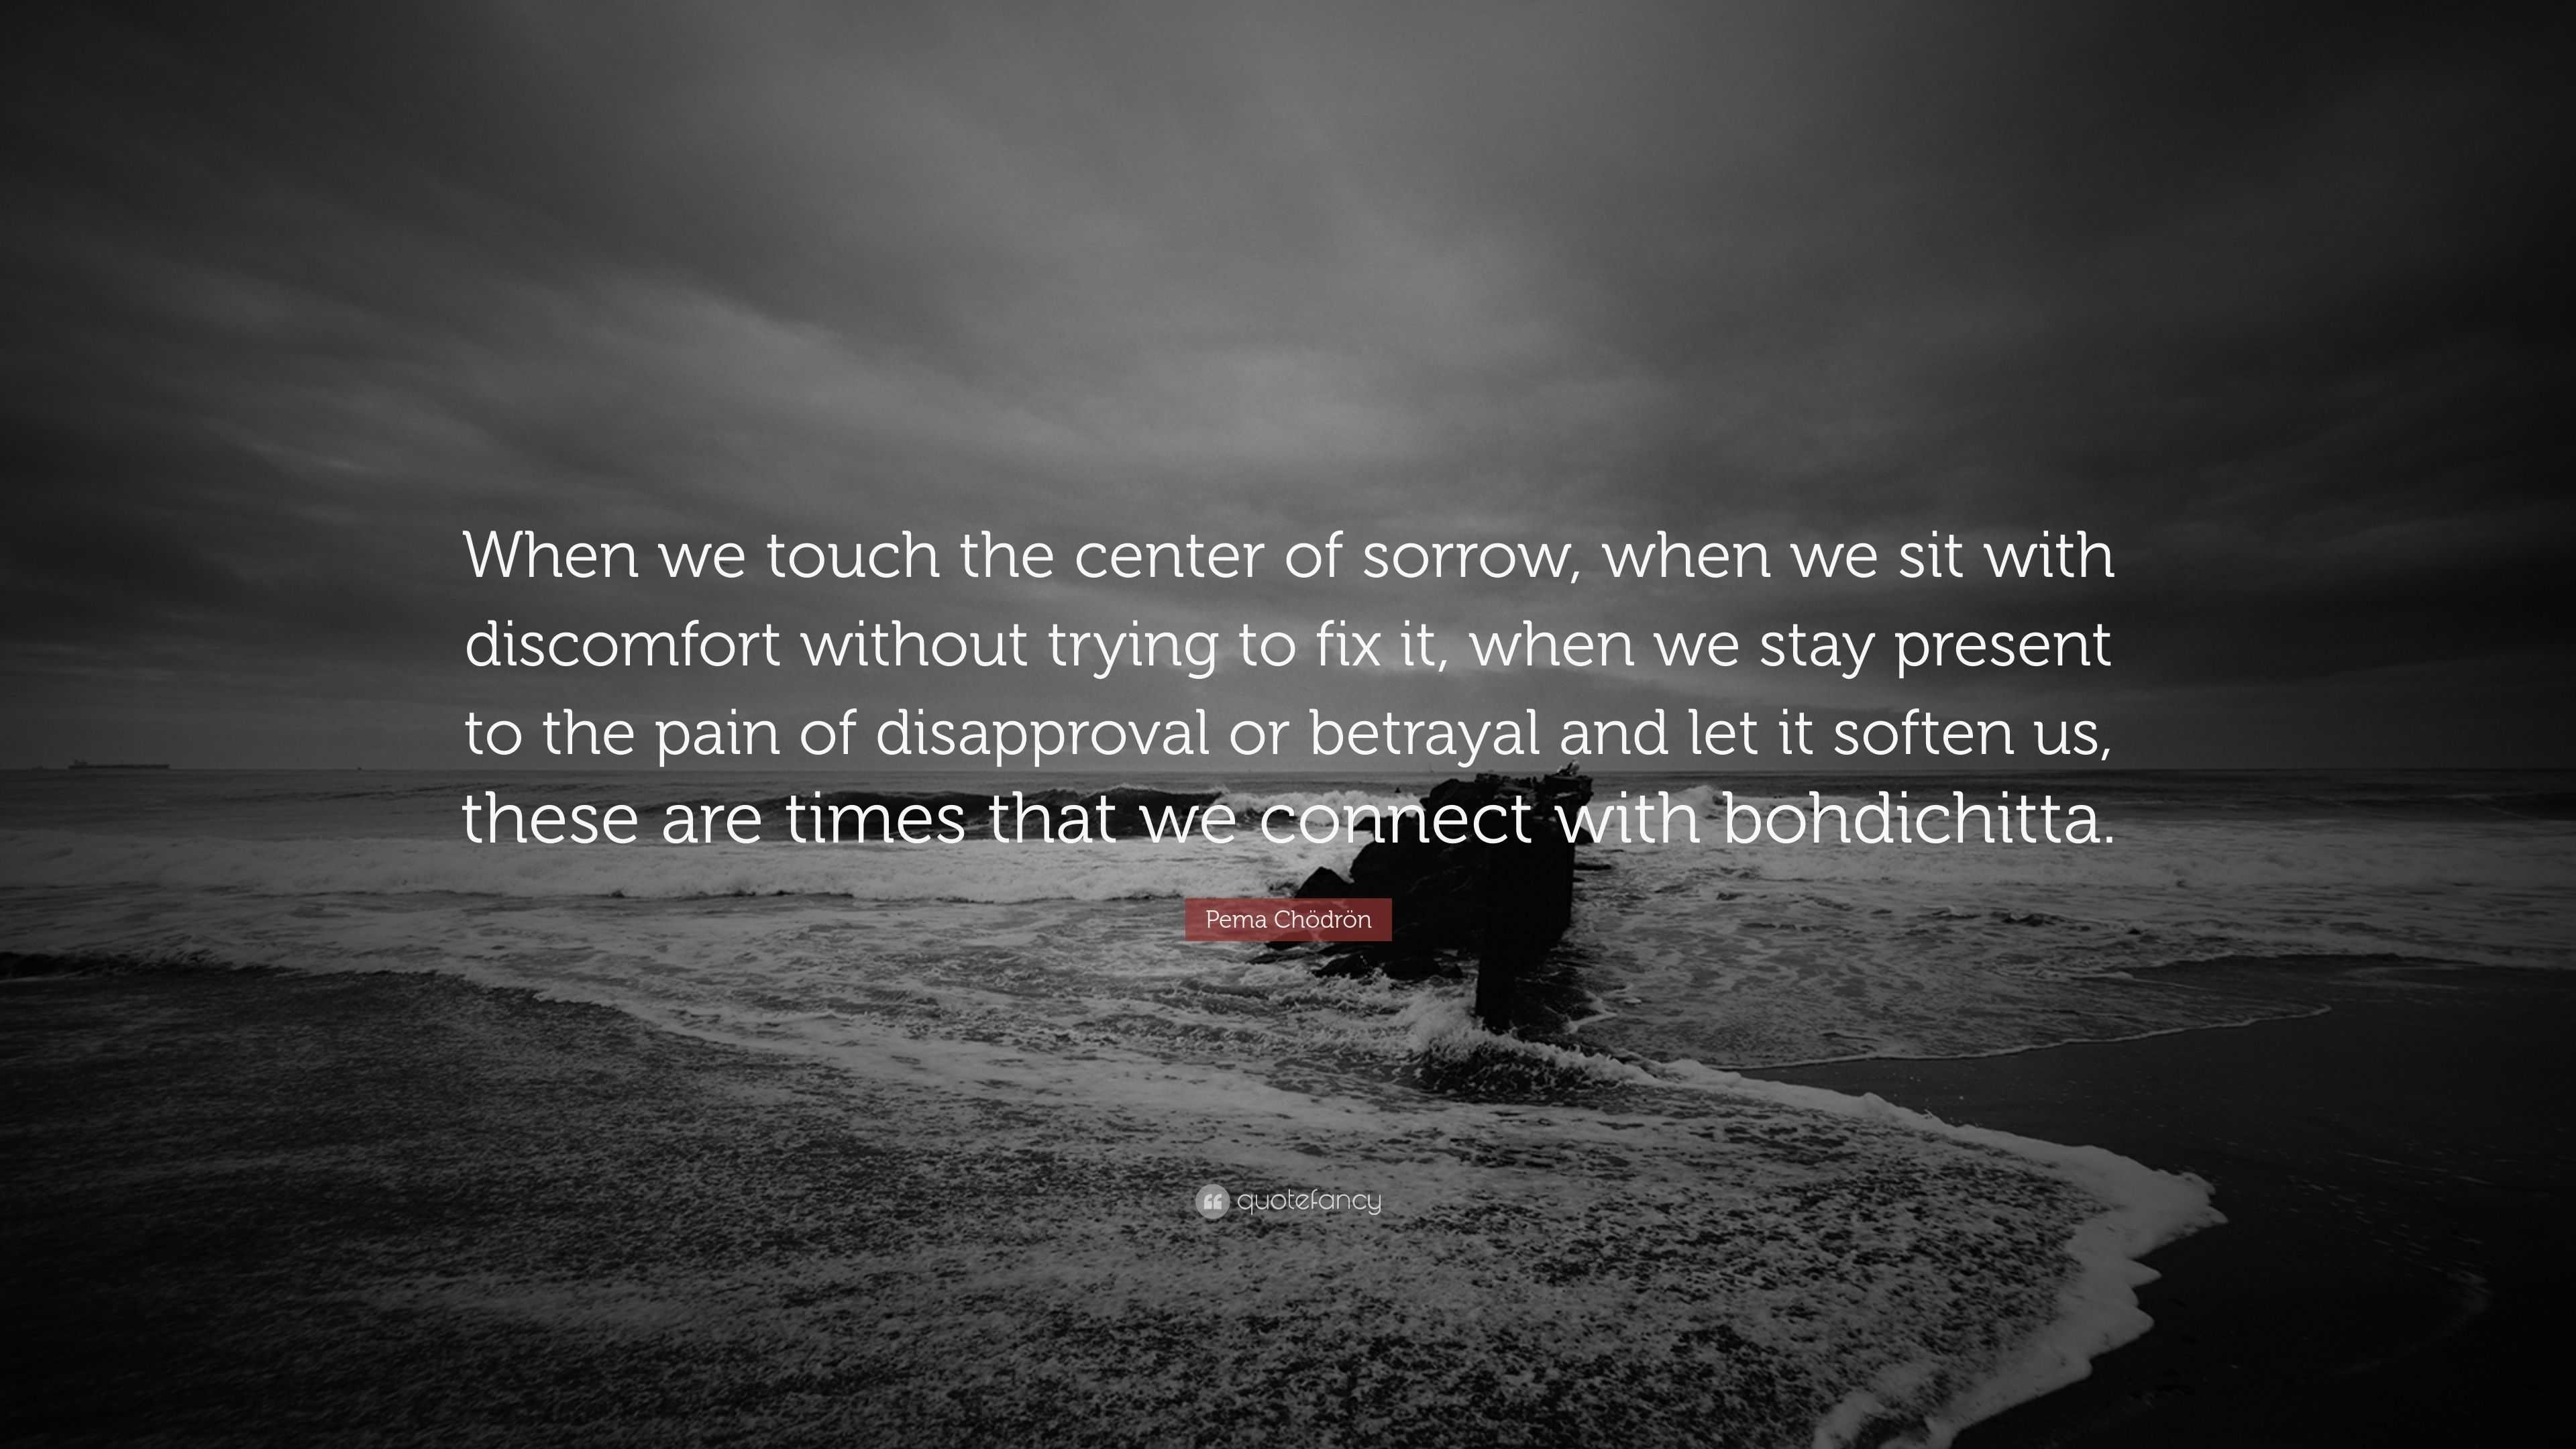 Pema Chödrön Quote: “When we touch the center of sorrow, when we sit ...